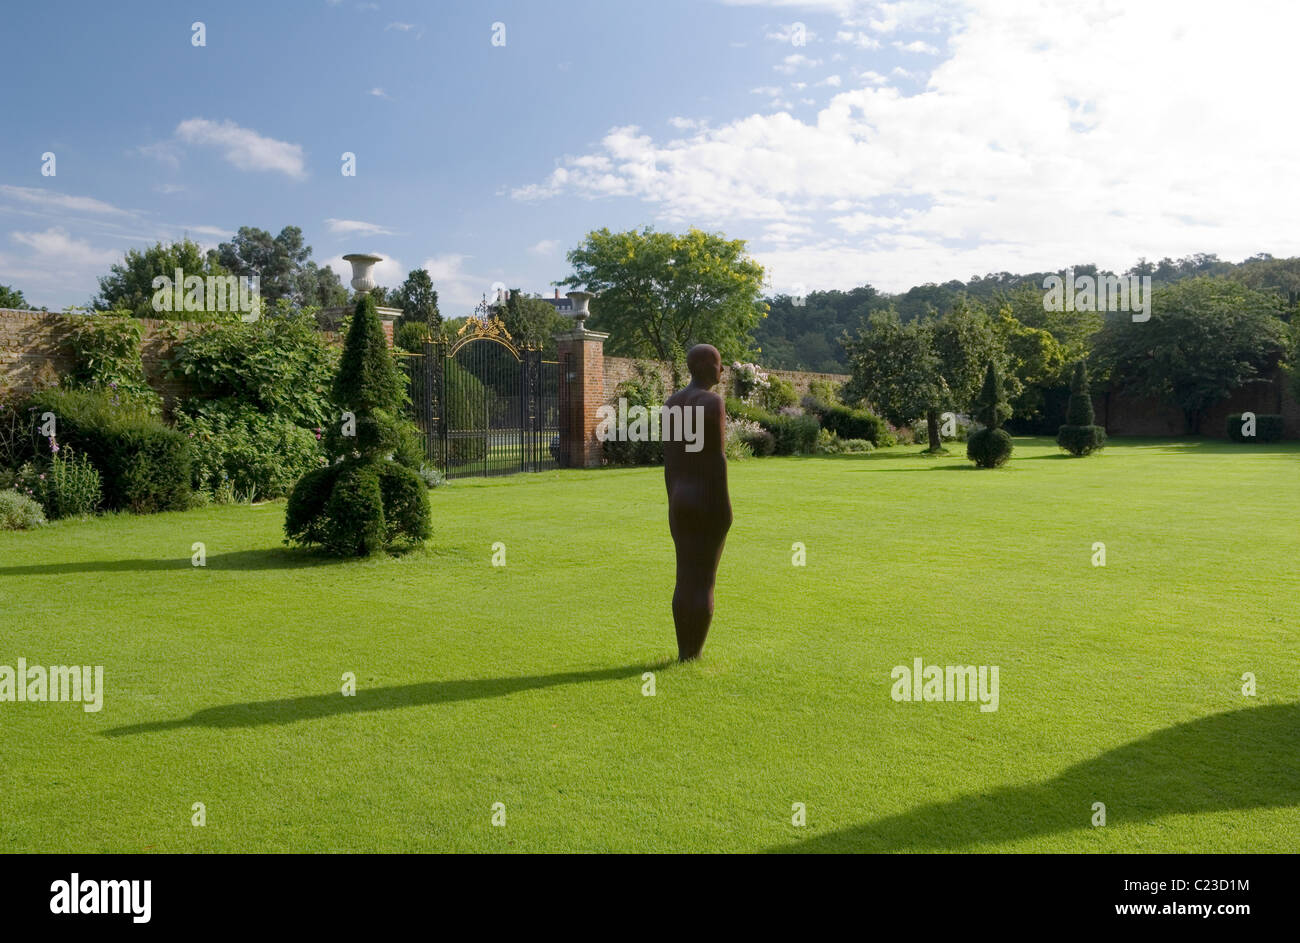 An Anthony Gormley sculpture on the lawn of a Richmond estate with topiary Stock Photo